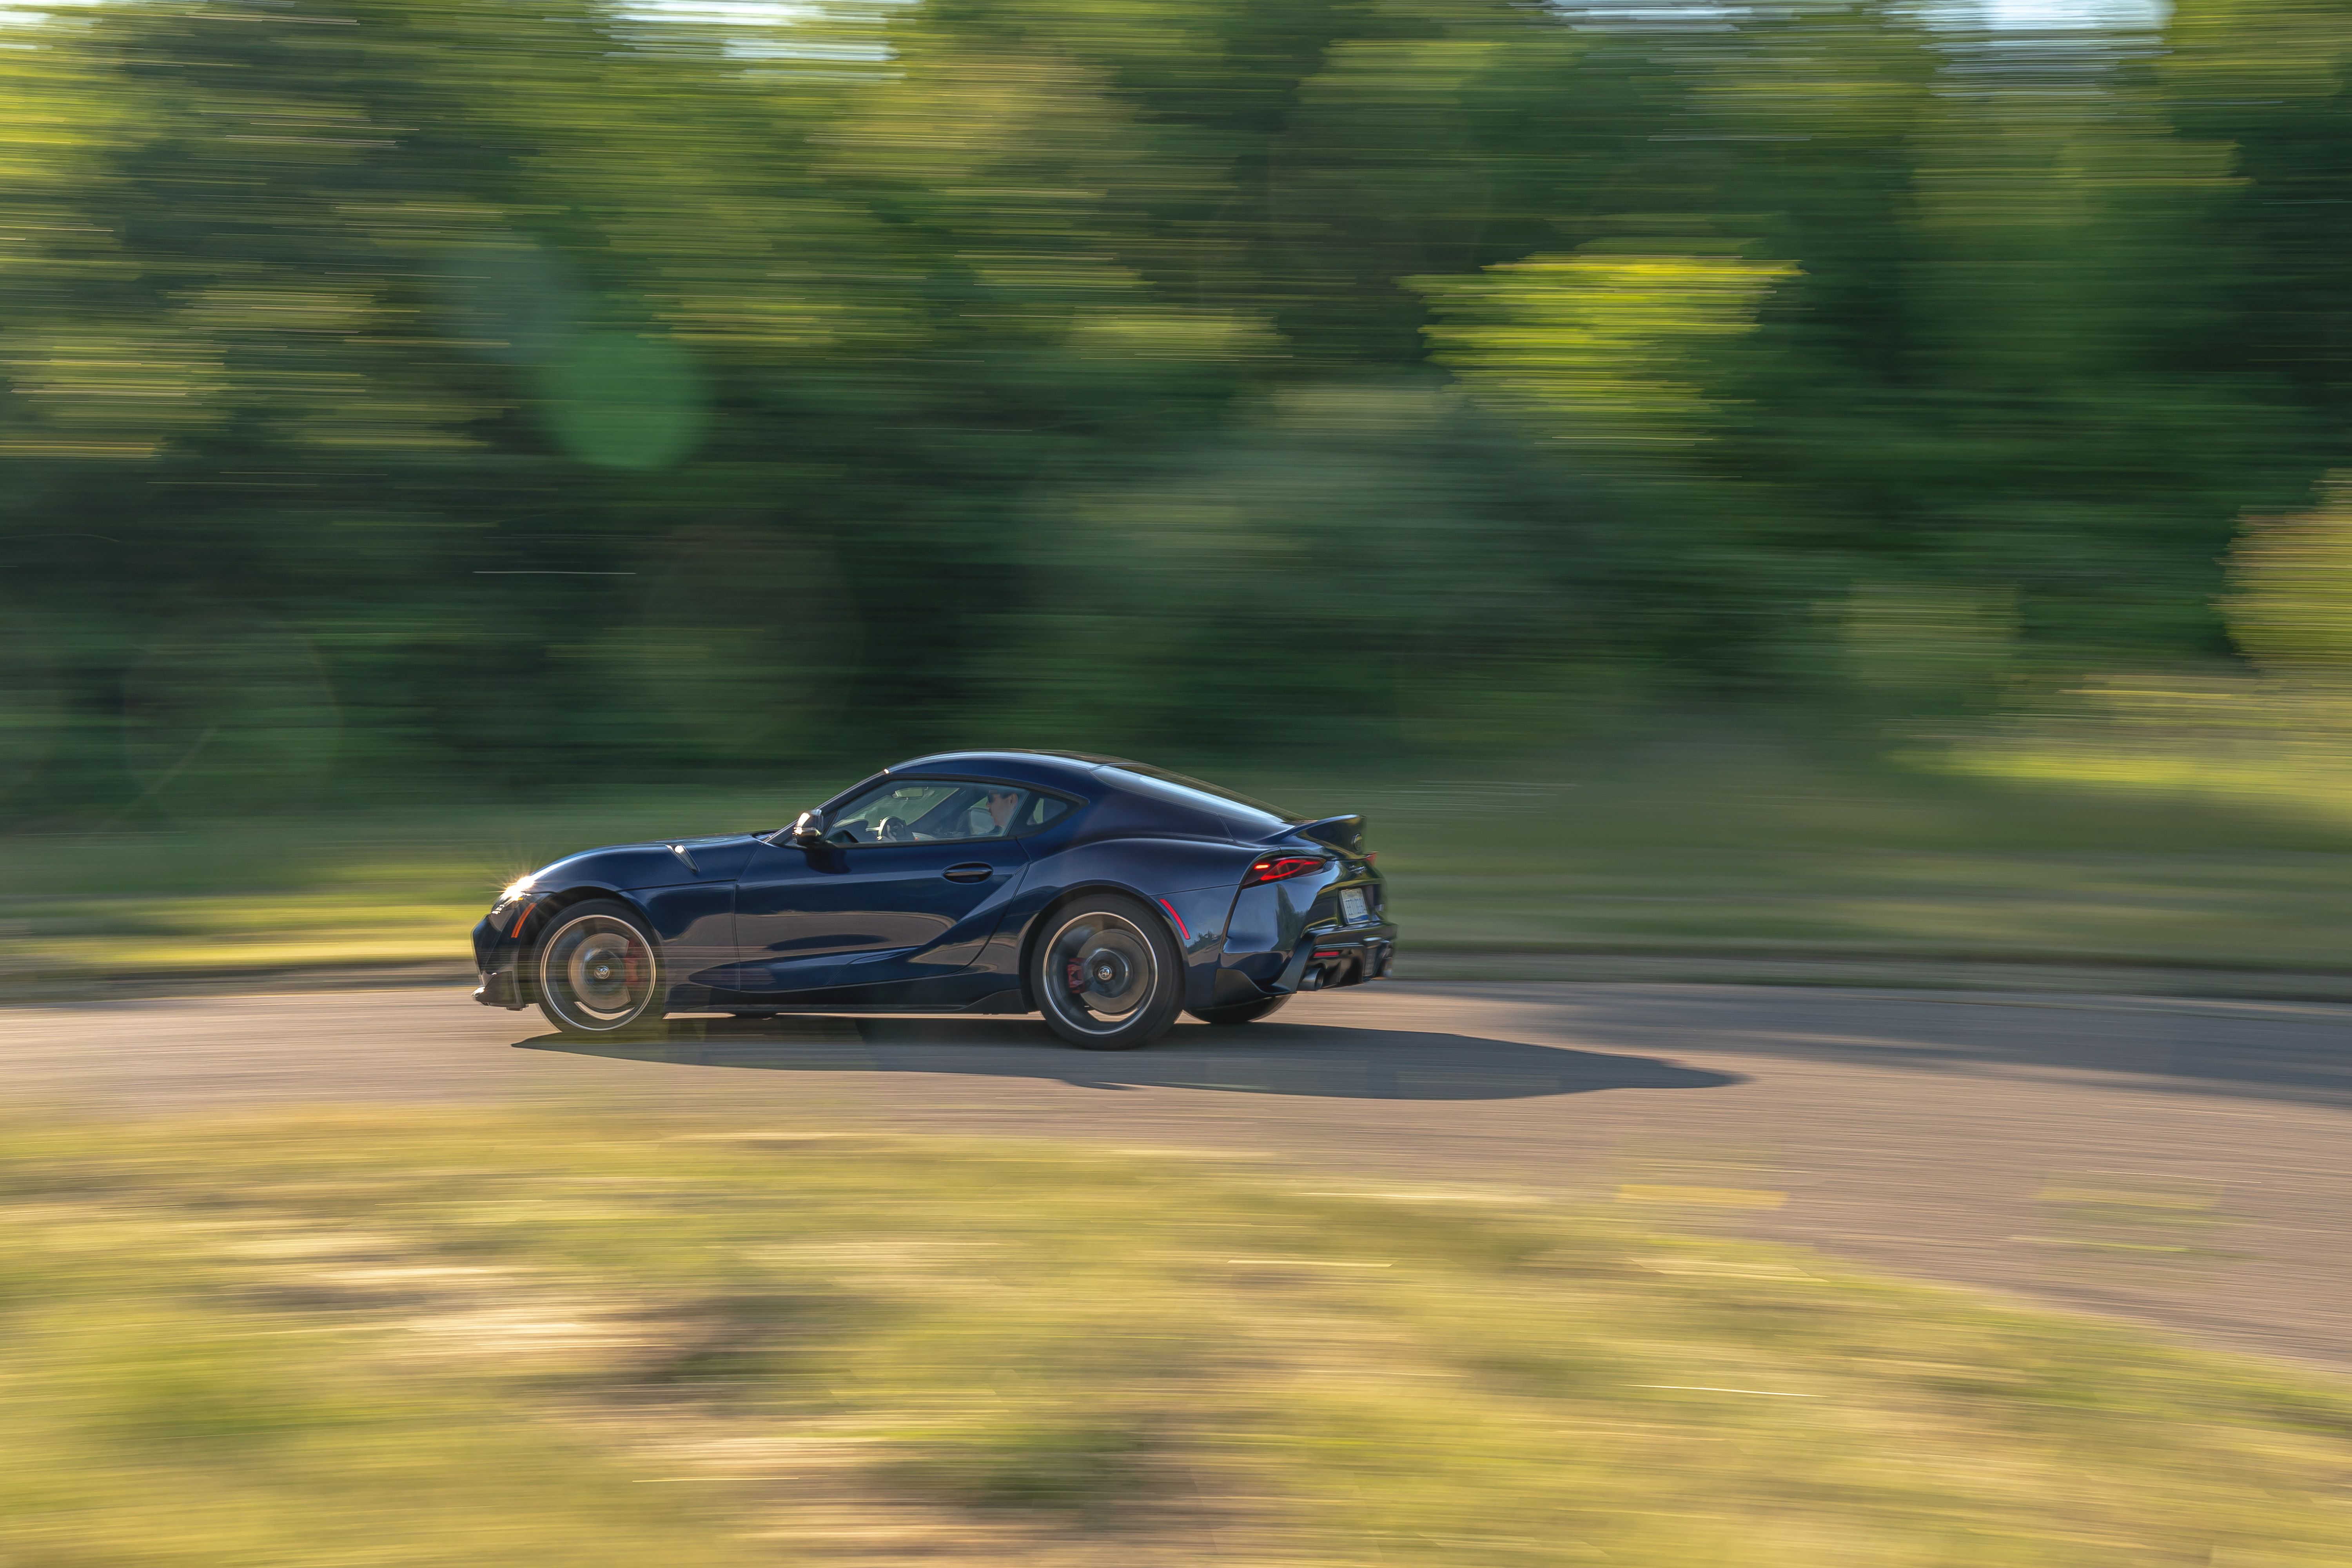 2020 Toyota Supra 3.0 Long-Term Road Test: 40,000-Mile Wrap-Up